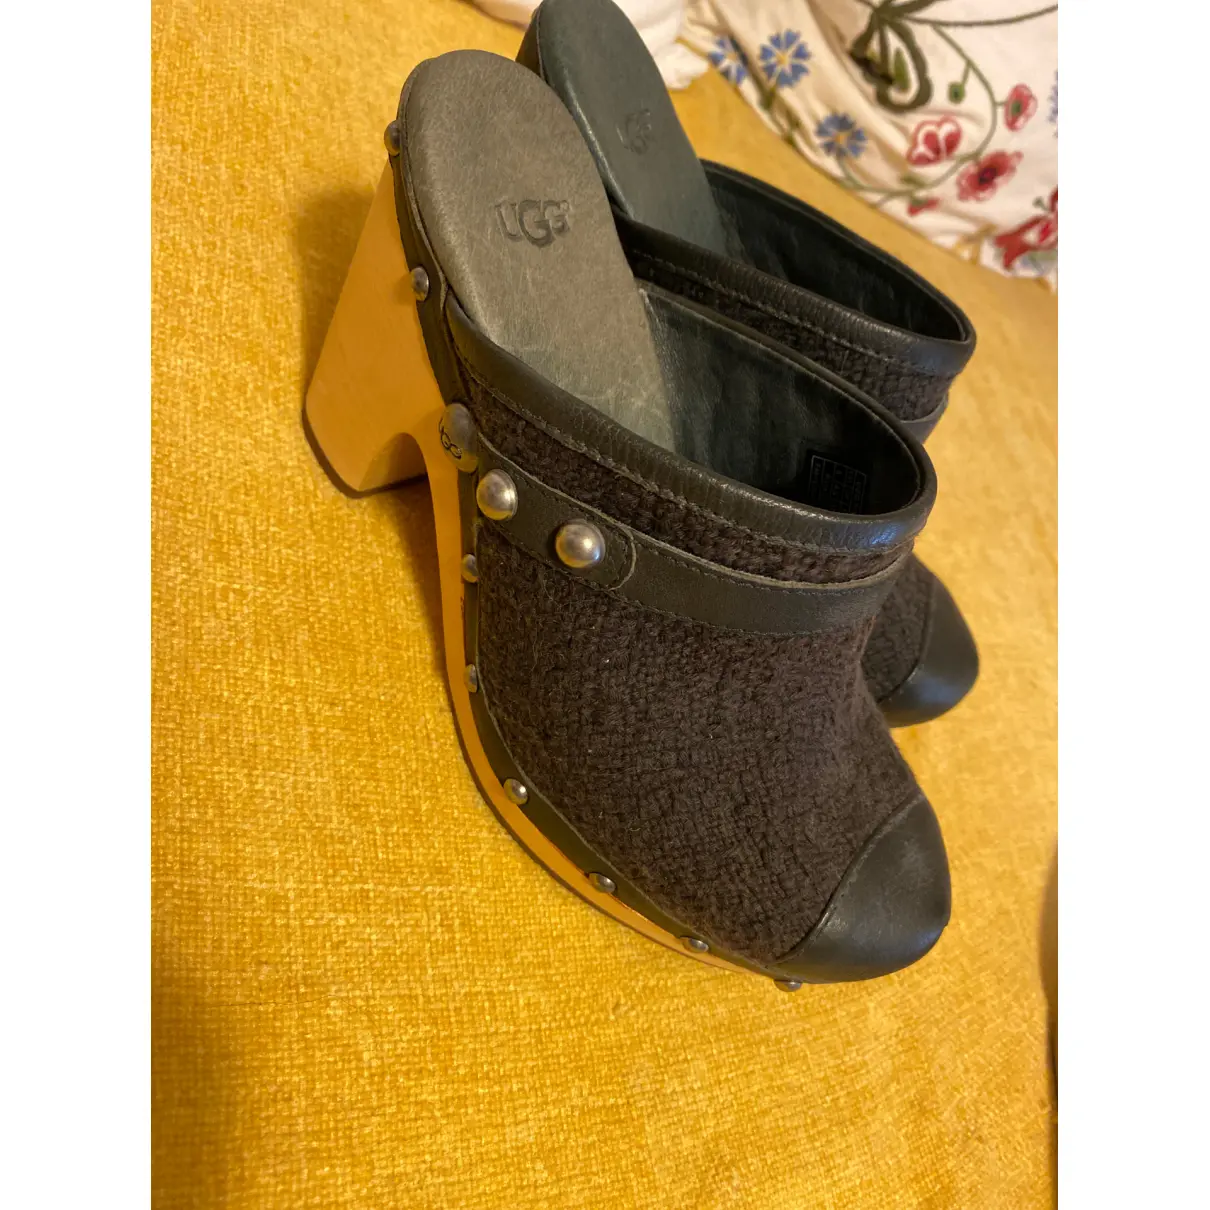 Buy Ugg Cloth mules & clogs online